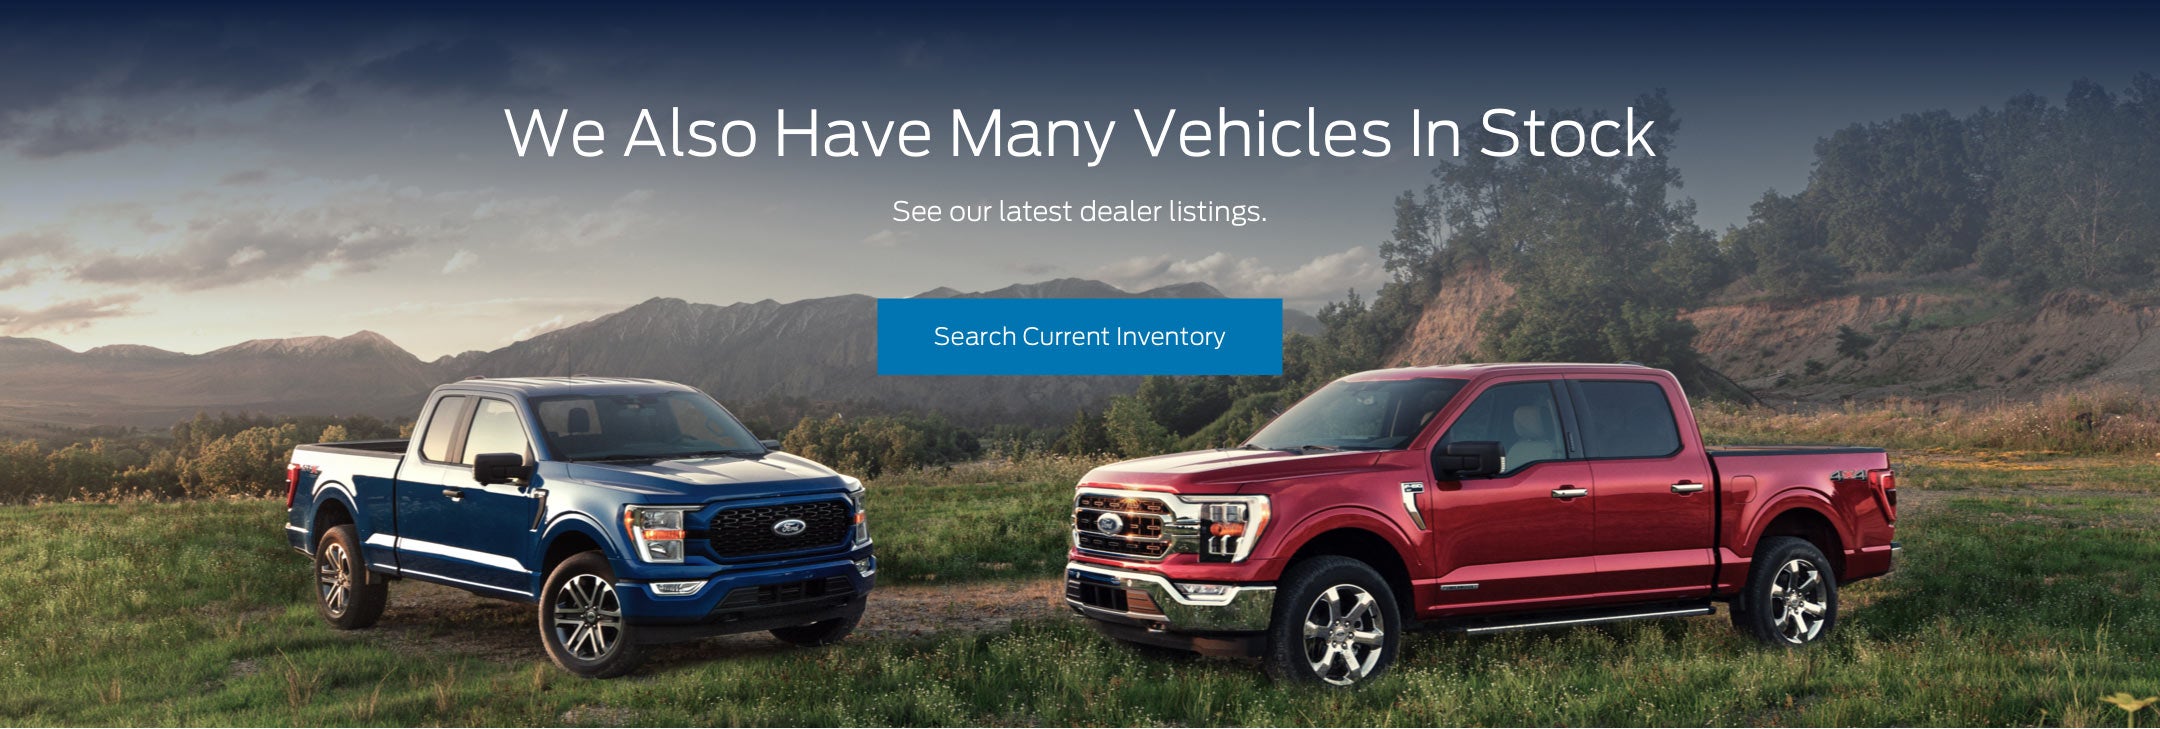 Ford vehicles in stock | Crain Ford Jacksonville in Jacksonville AR